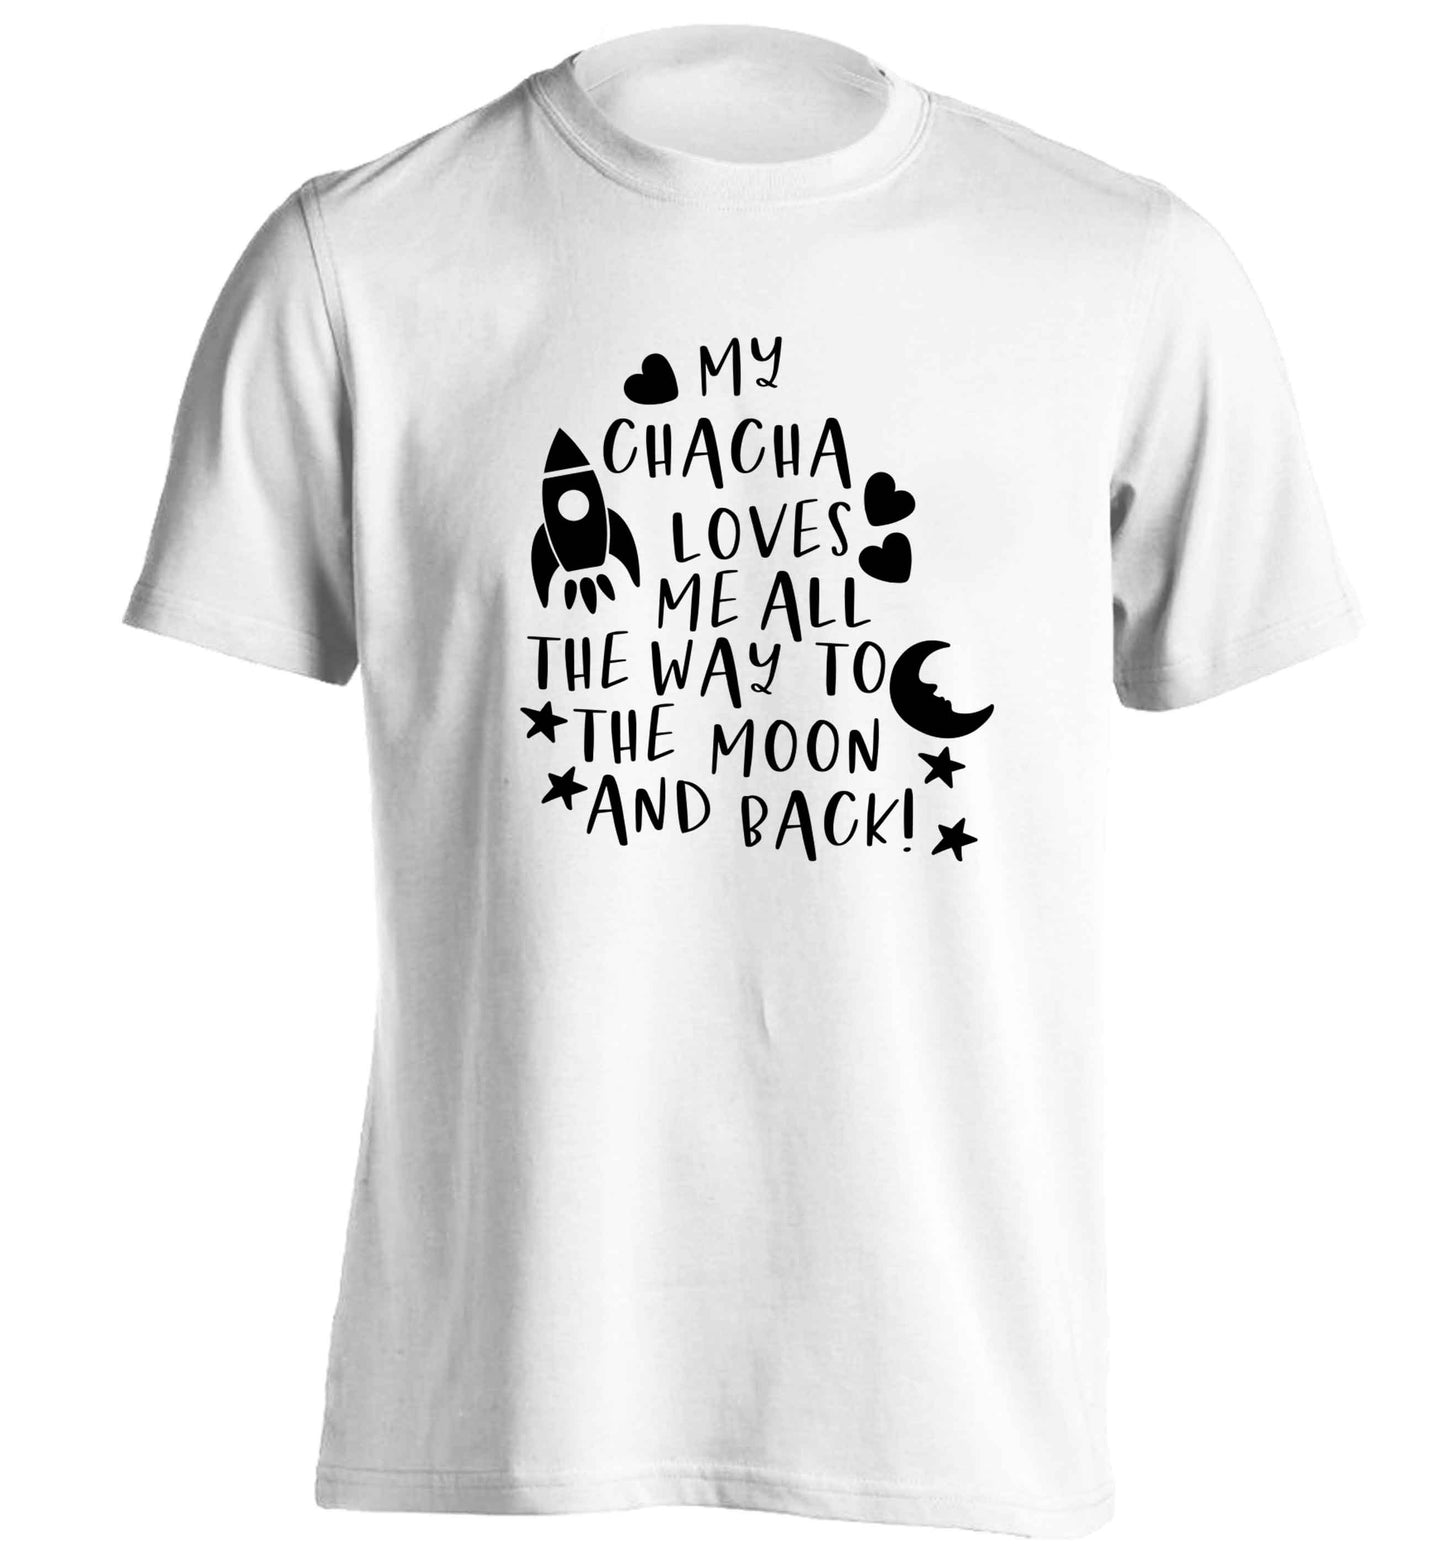 My chacha loves me all the way to the moon and back adults unisex white Tshirt 2XL